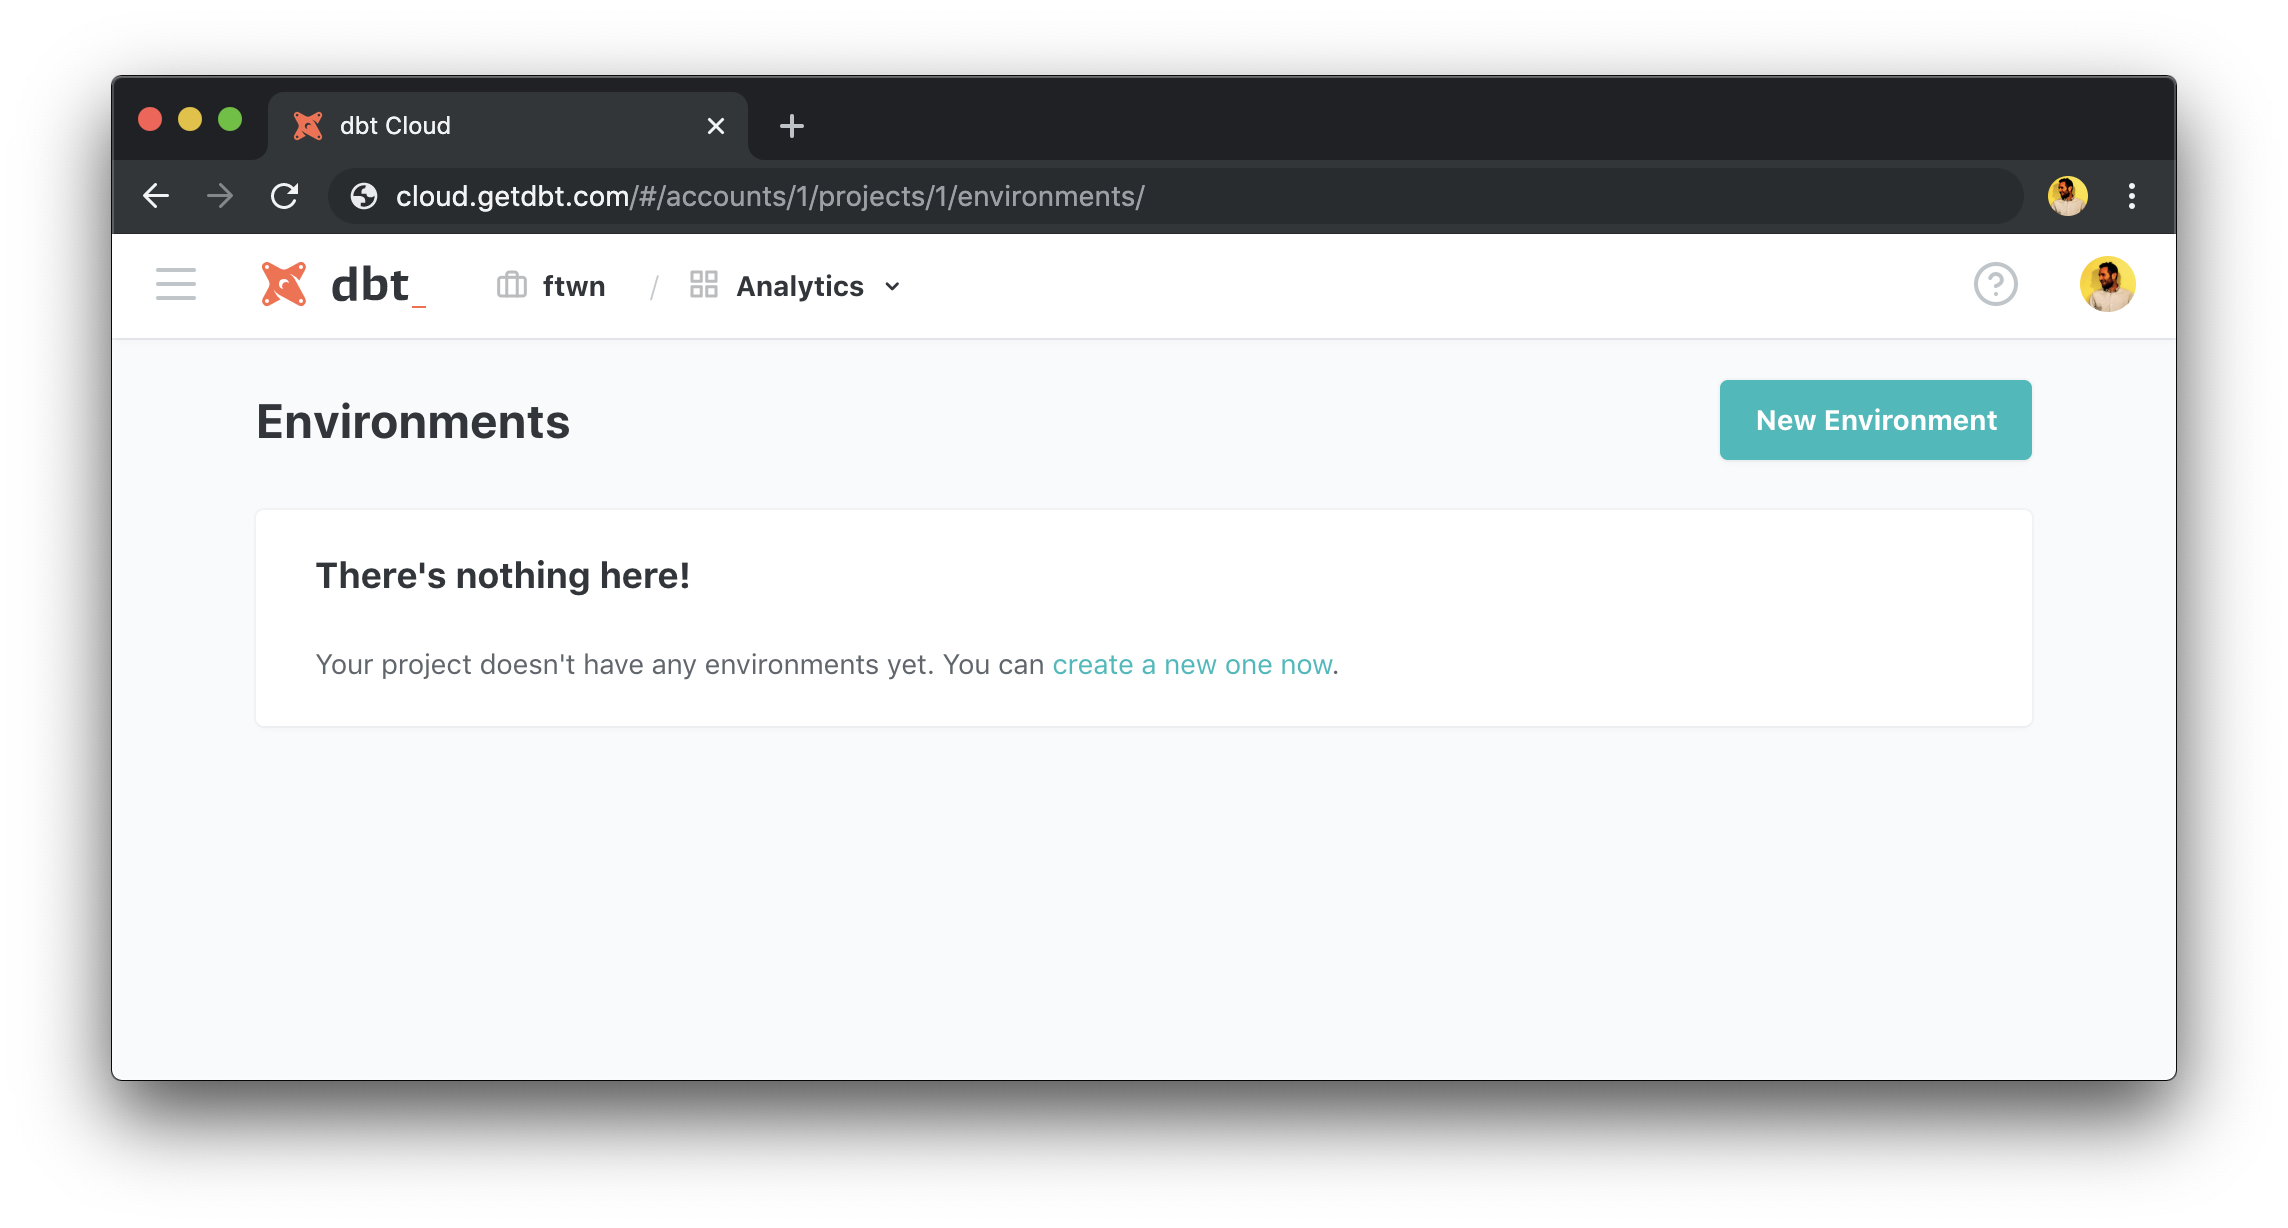 Creating a new environment for the Analytics project